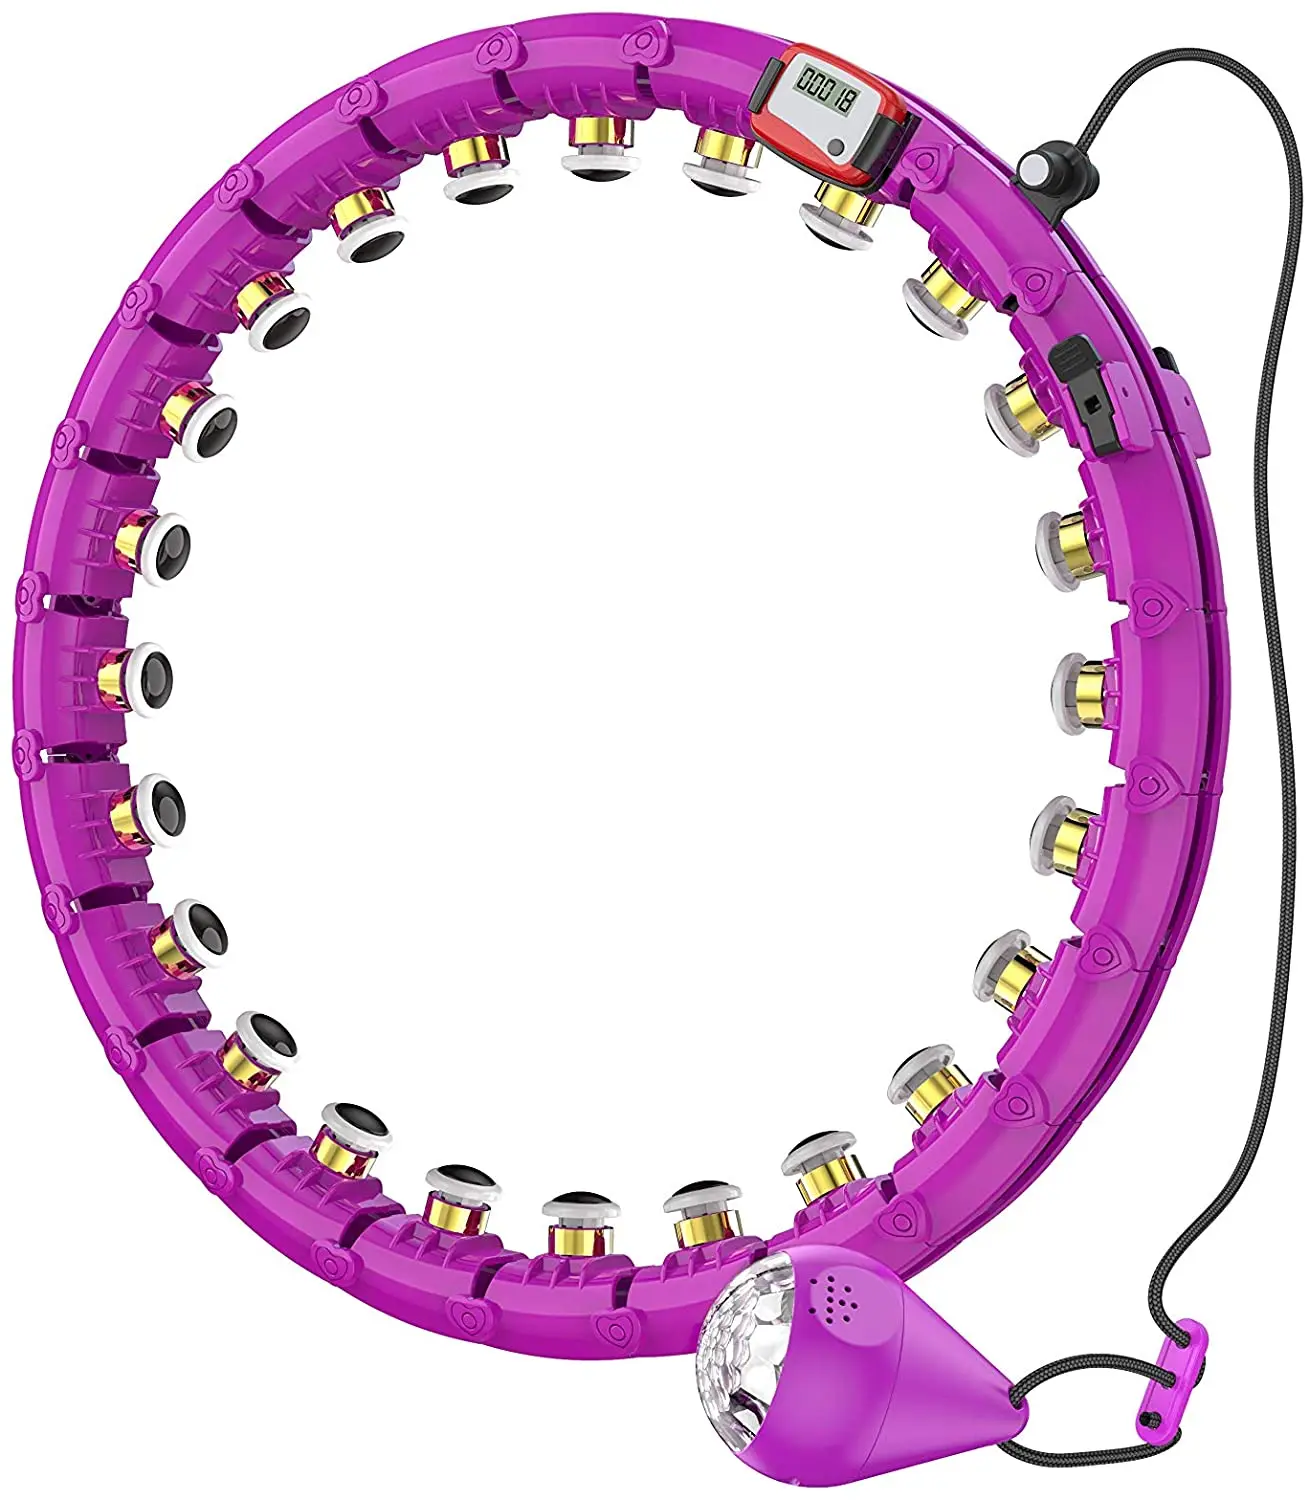 

Smart Hula Ring Auto-Spinning Intelligent Record Data Exercise Fitness Hula Hoops Workout 24 Detachable Sections for Adu, Purple